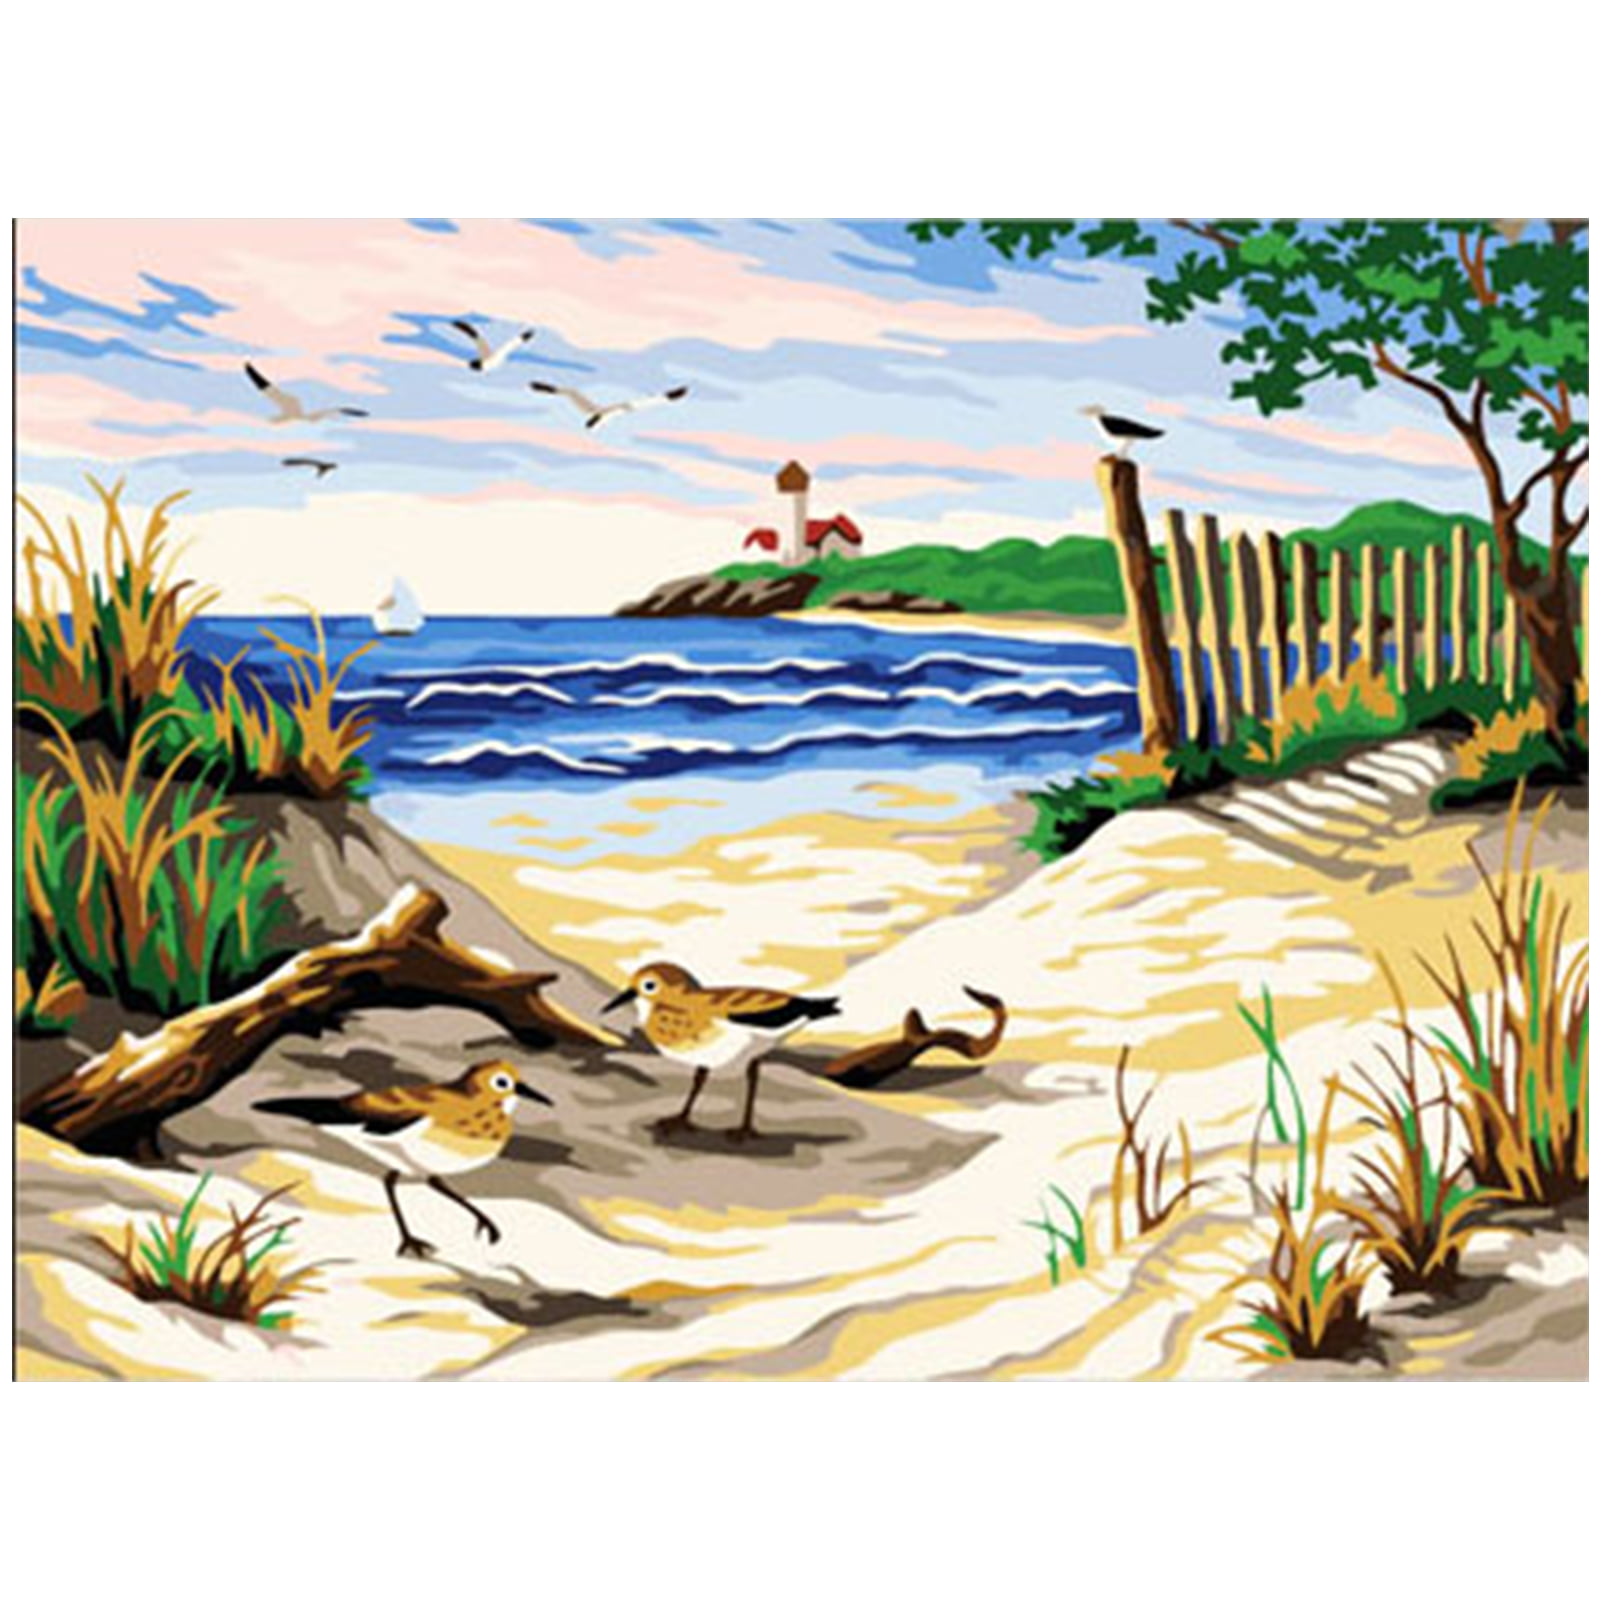 Paint by Numbers Beach Vacation Girl for Adults and Kids DIY Oil Painting Gift Kits Unframed Pre-Printed Canvas Art Home Decoration 16X20 Inch